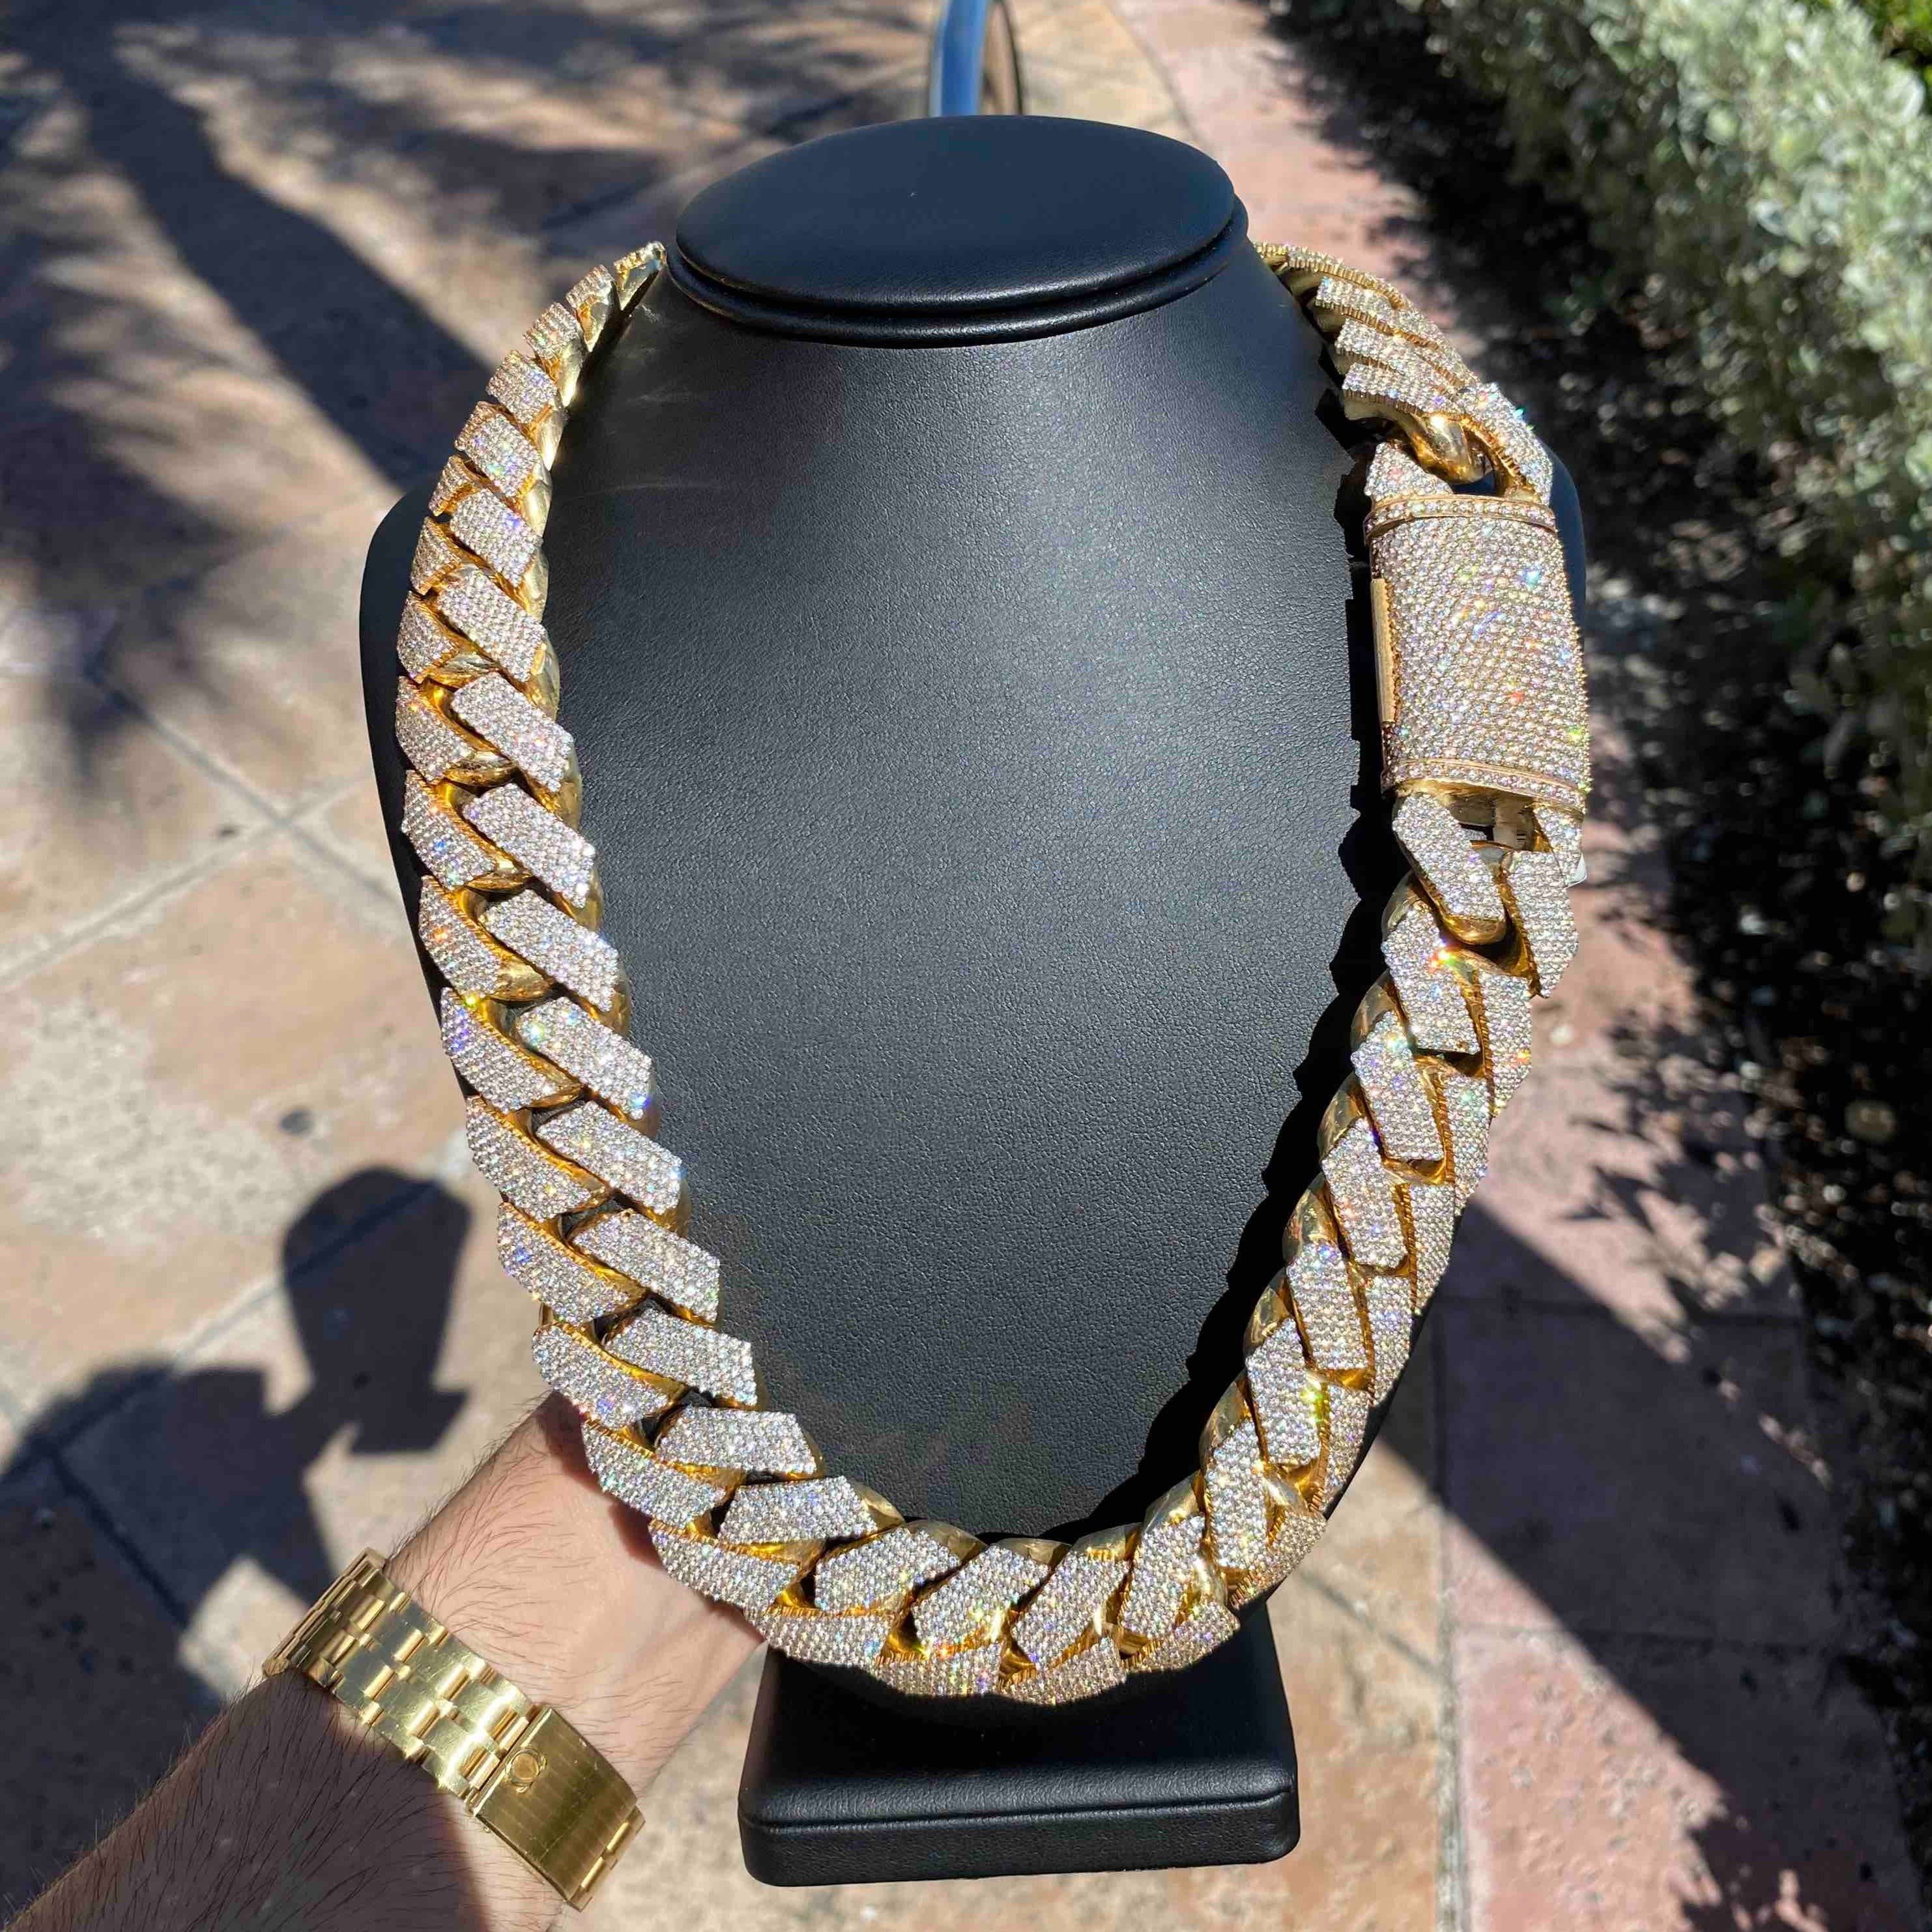 Thick Classy Curb, Miami Cuban Link - Luxury Gold Chain Strap for Bags –  Mautto